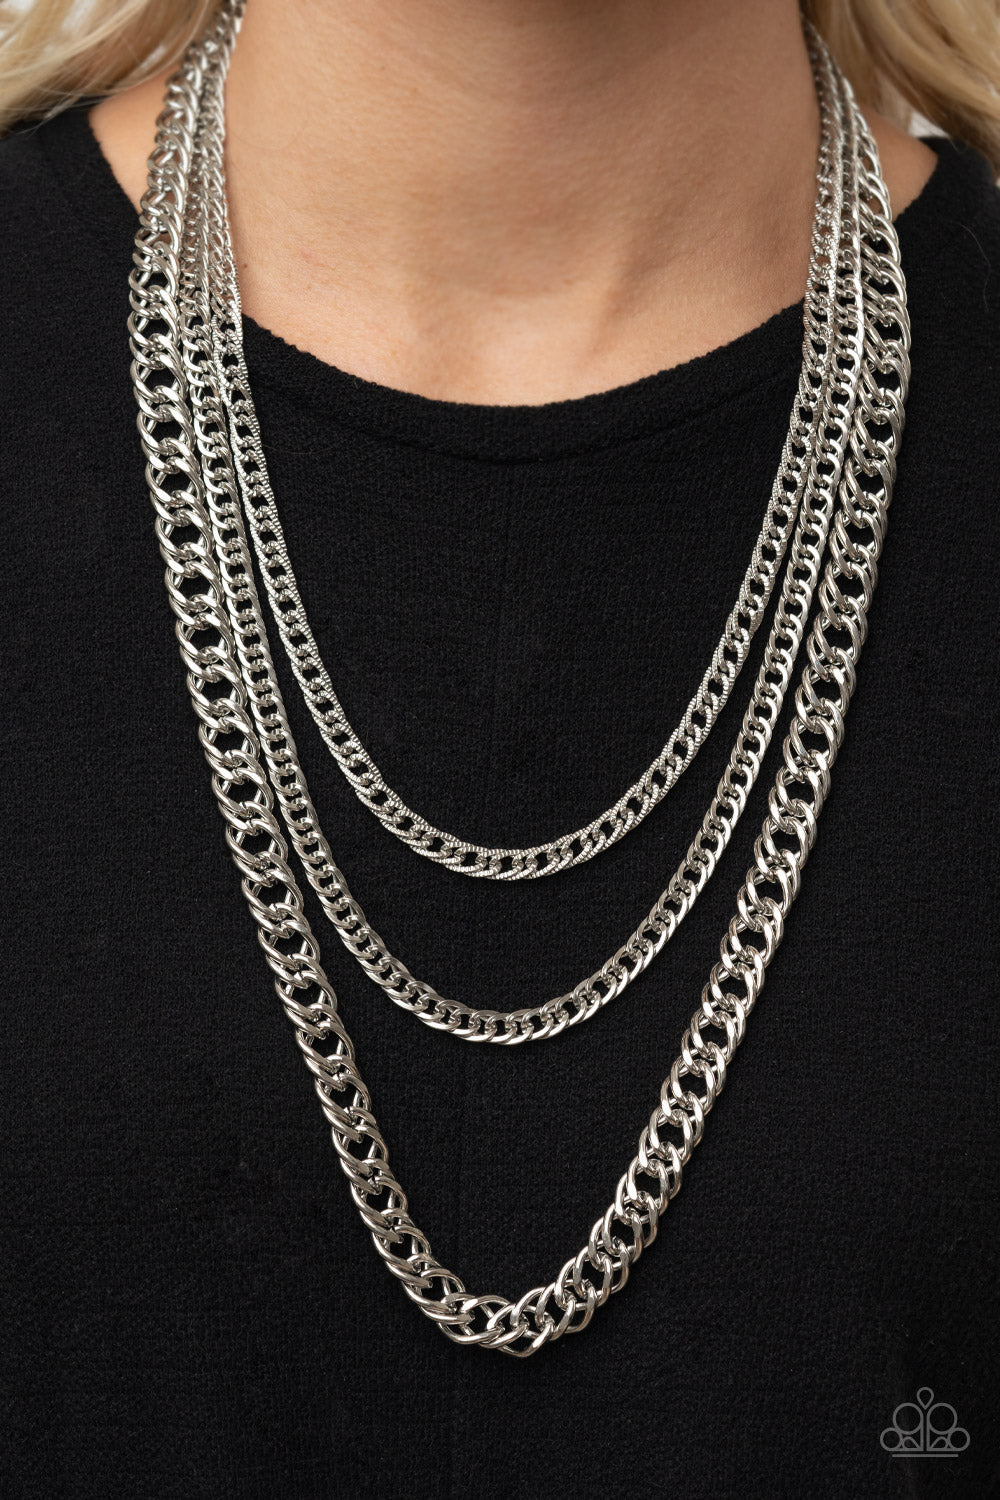 Chain of Champions Silver Necklace - Paparazzi Accessories  Bold layers of glistening silver chains of varying sizes and textures, fall like a weighty medal across the chest creating an edgy industrial effect. Features an adjustable clasp closure.  All Paparazzi Accessories are lead free and nickel free!   Sold as one individual necklace. Includes one pair of matching earrings.